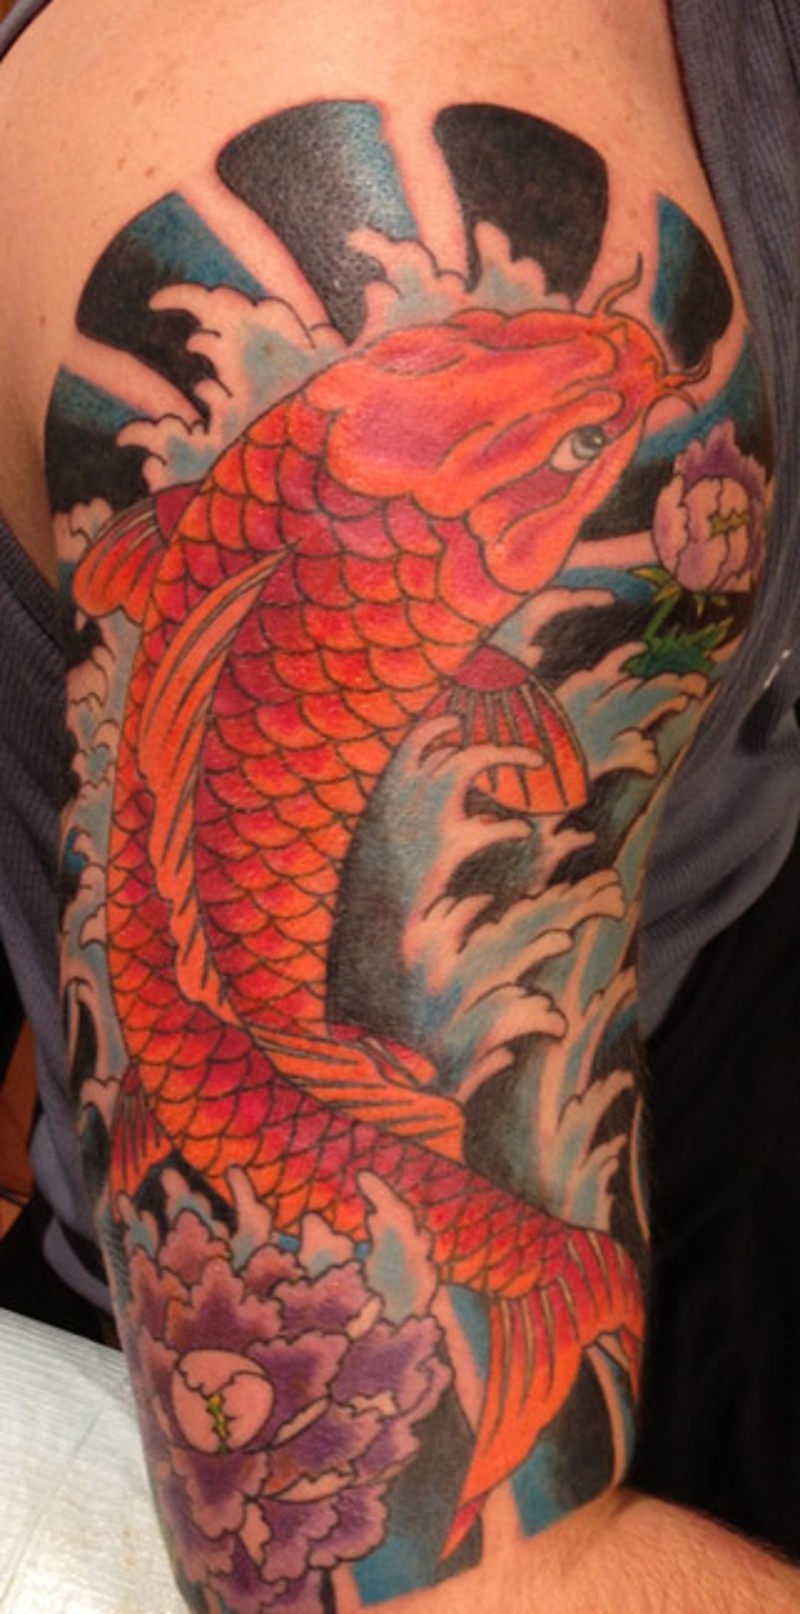 Asian style colorful shoulder tattoo of carp fish flowers and waves